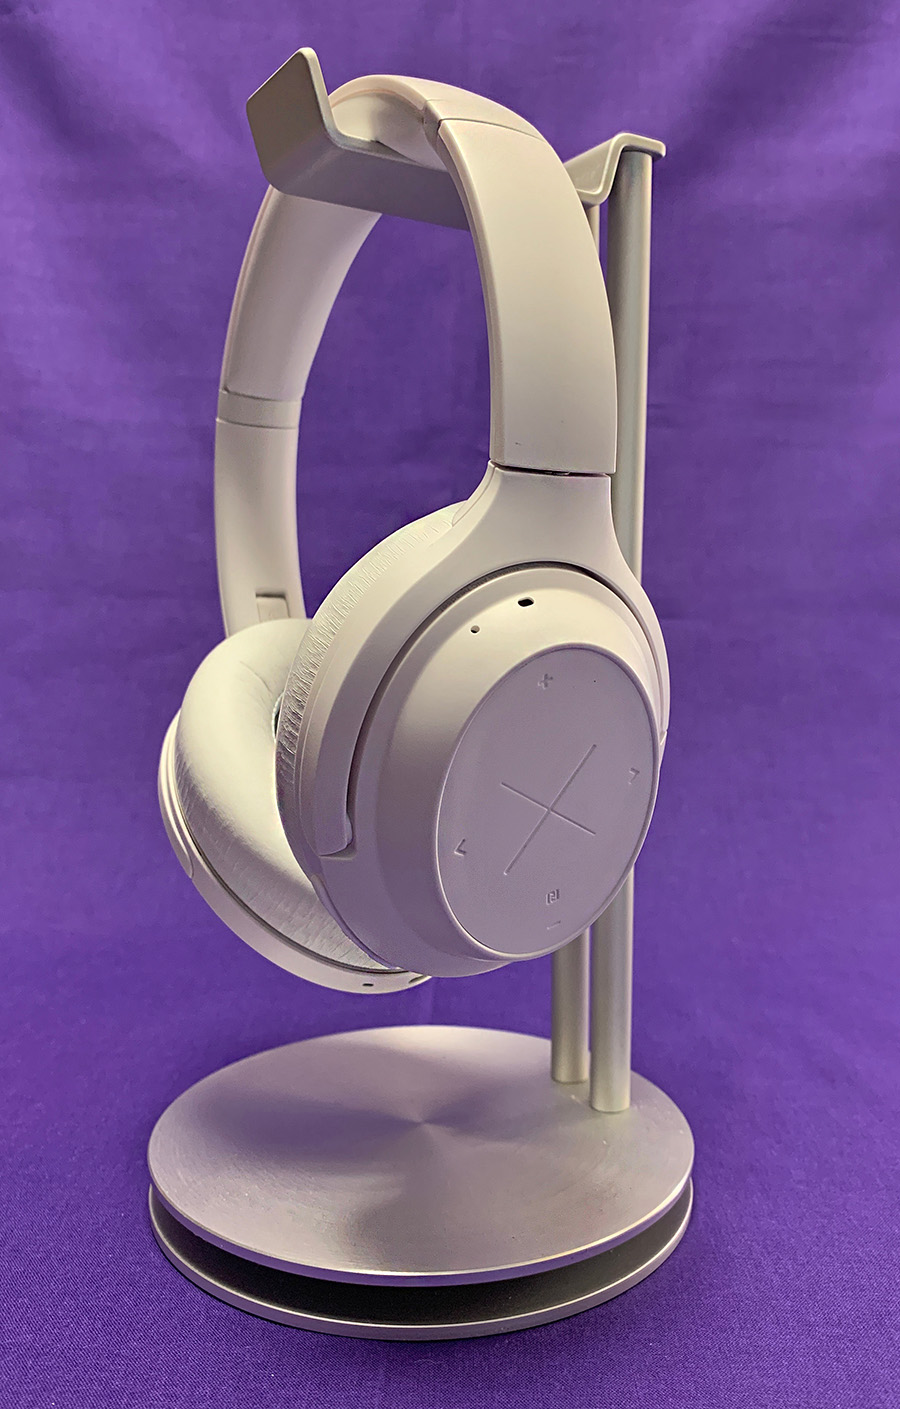 Schiereiland Donder energie X by KYGO A11/800 Noise Canceling Headphone review - The Gadgeteer